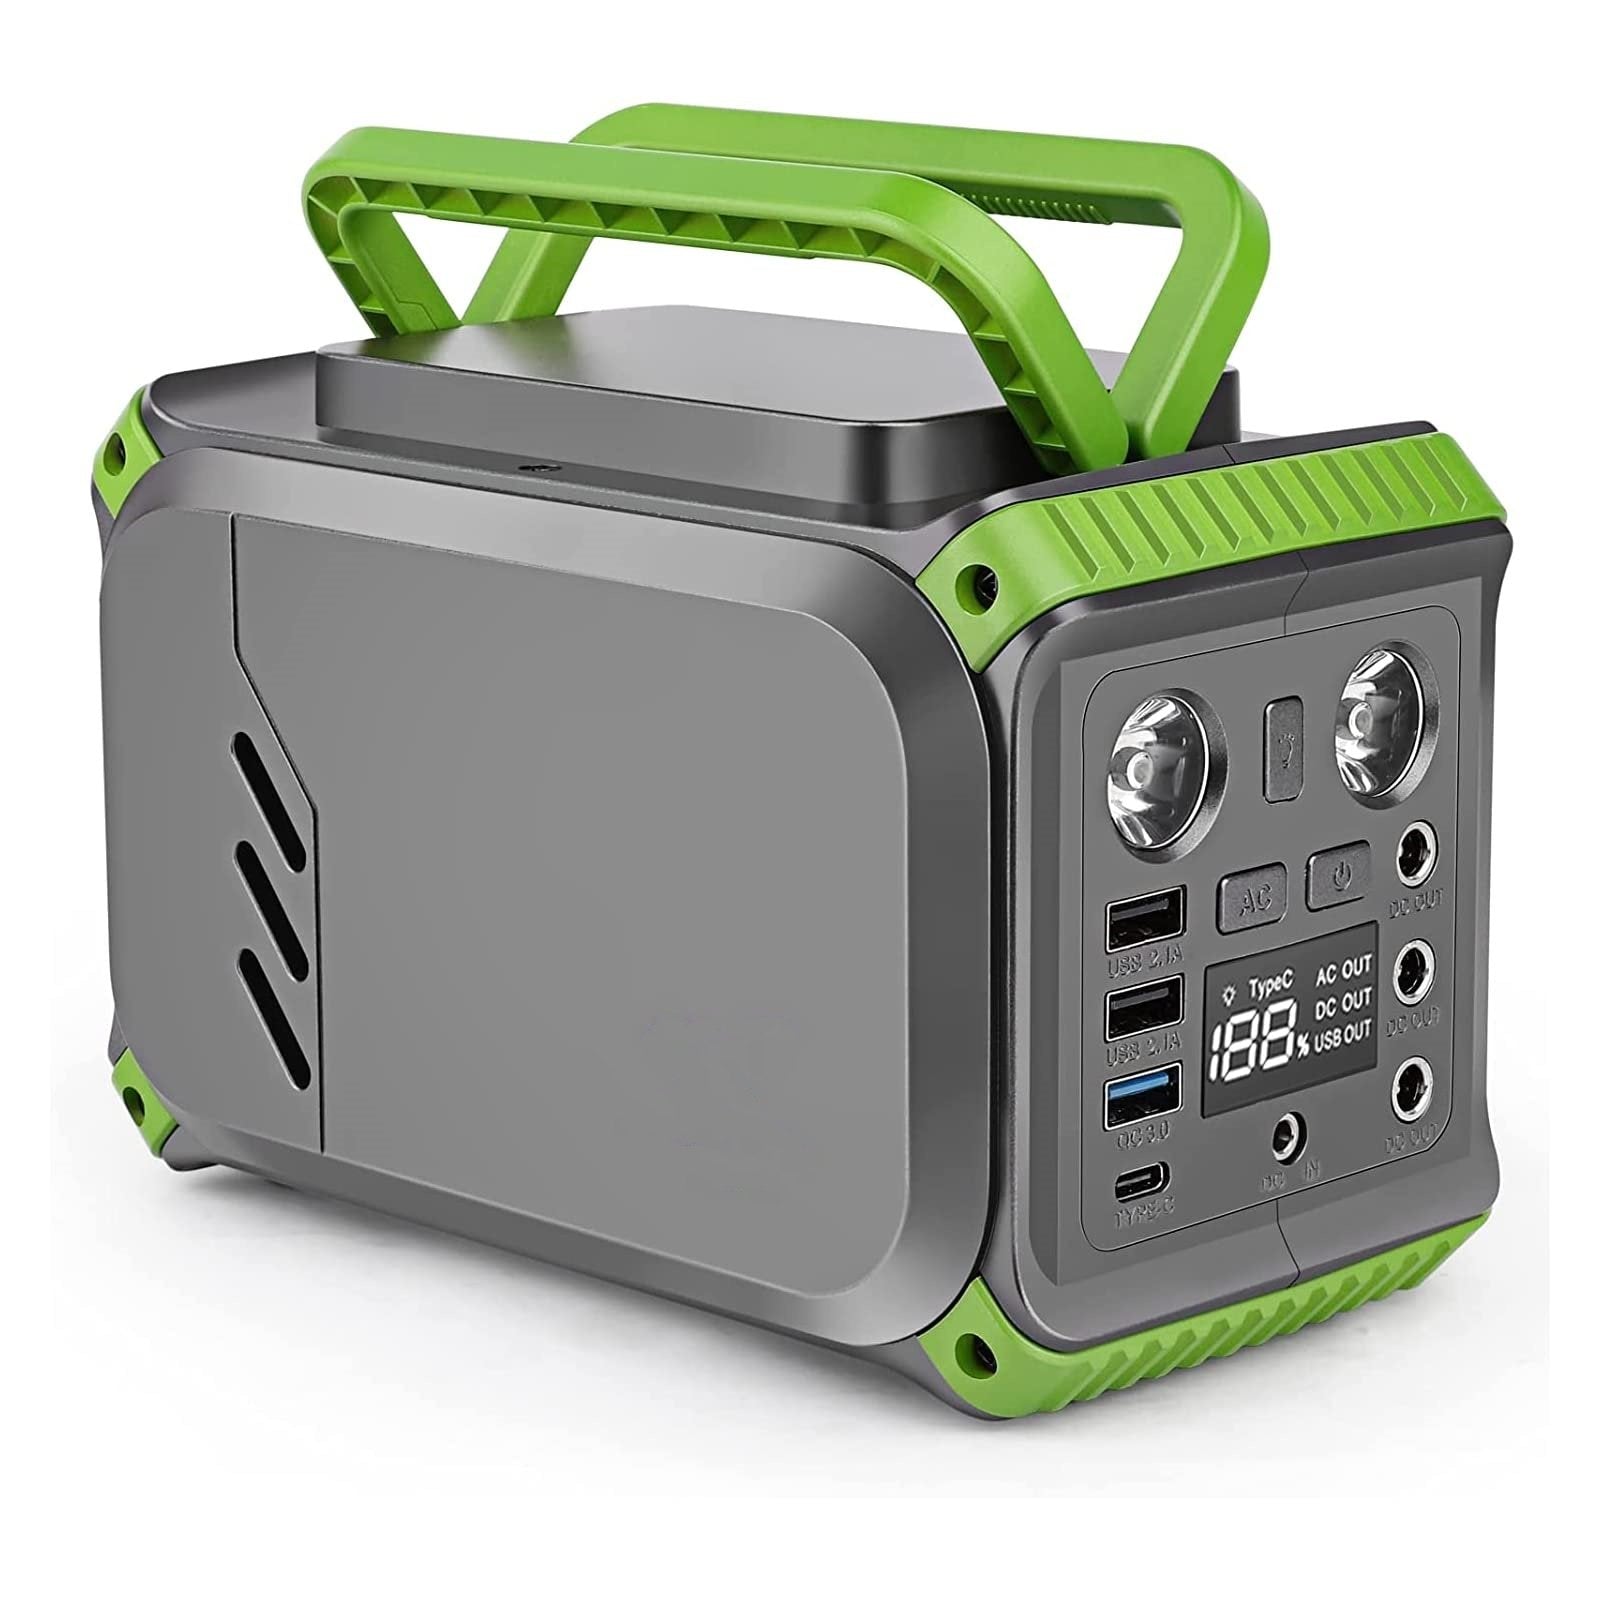 Doosl Portable Power Station 200W, 155Wh 42,000mAh Solar Generator Power Supply with LED Flashlights, Backup Battery for CPAP, Home Emergency, Outdoor Camping, Road Travel, Hunting, RV